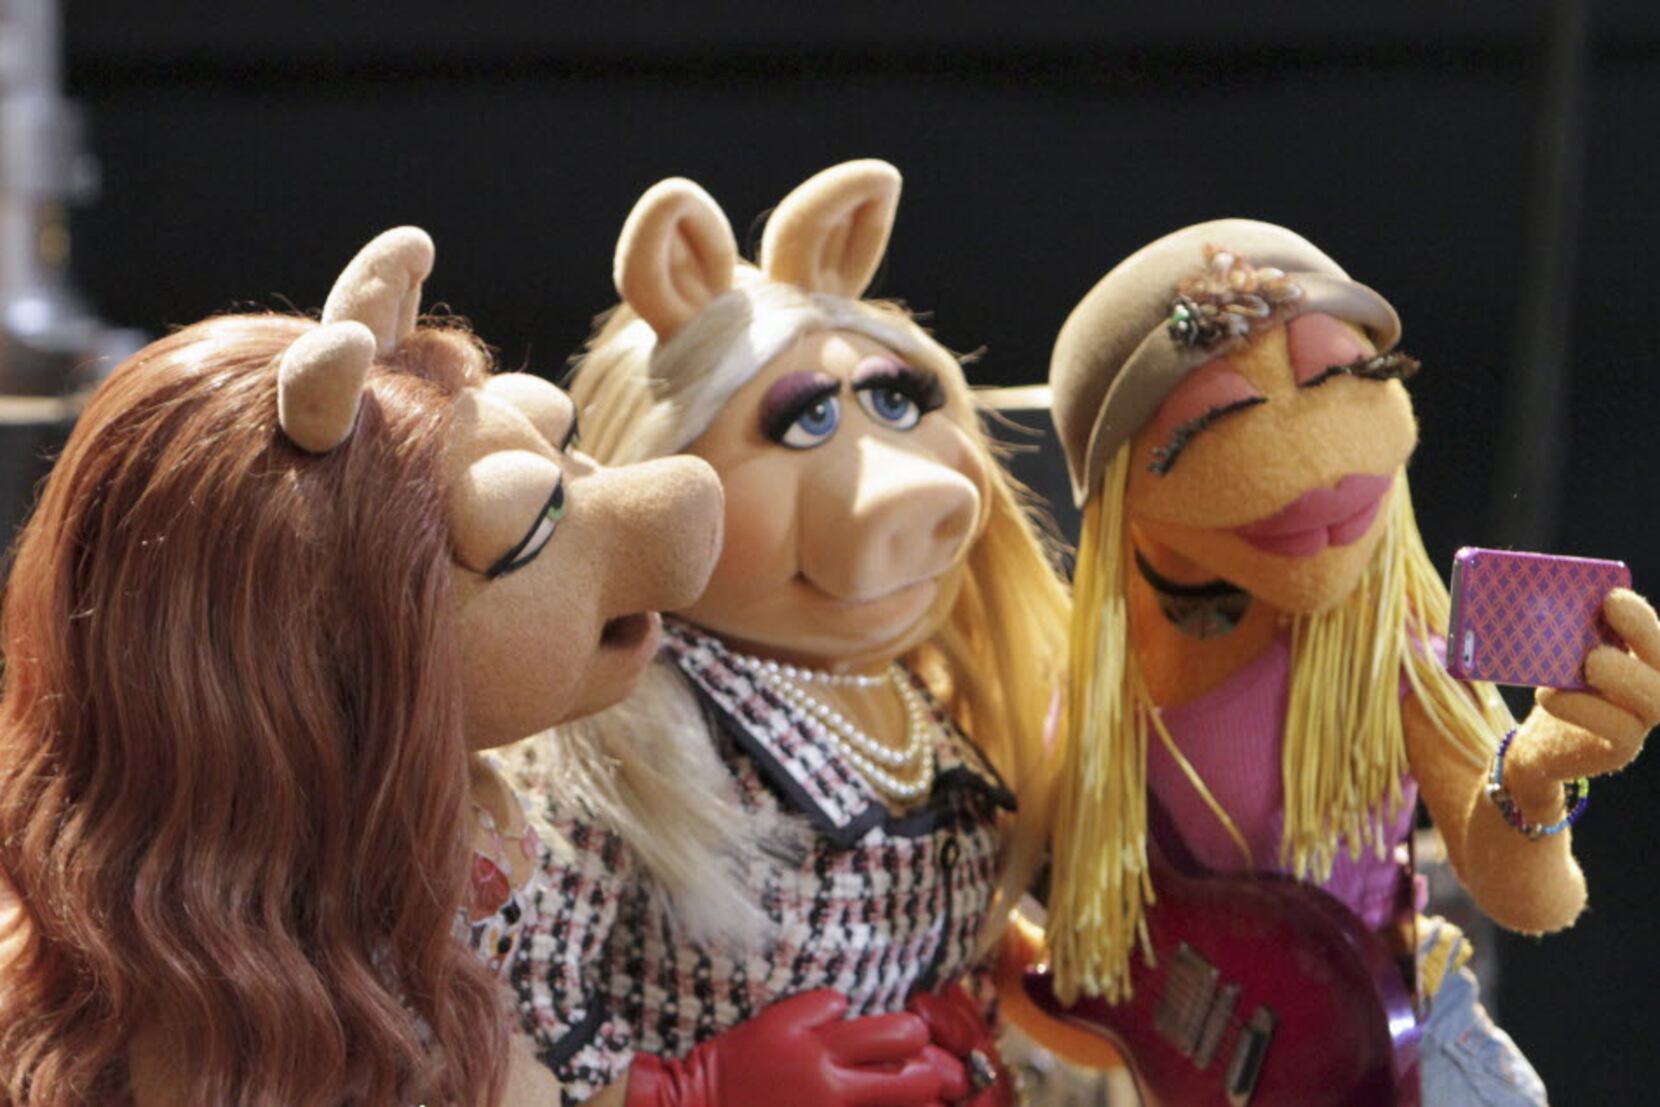 If you didn't grow up with the Muppets, can you love them?